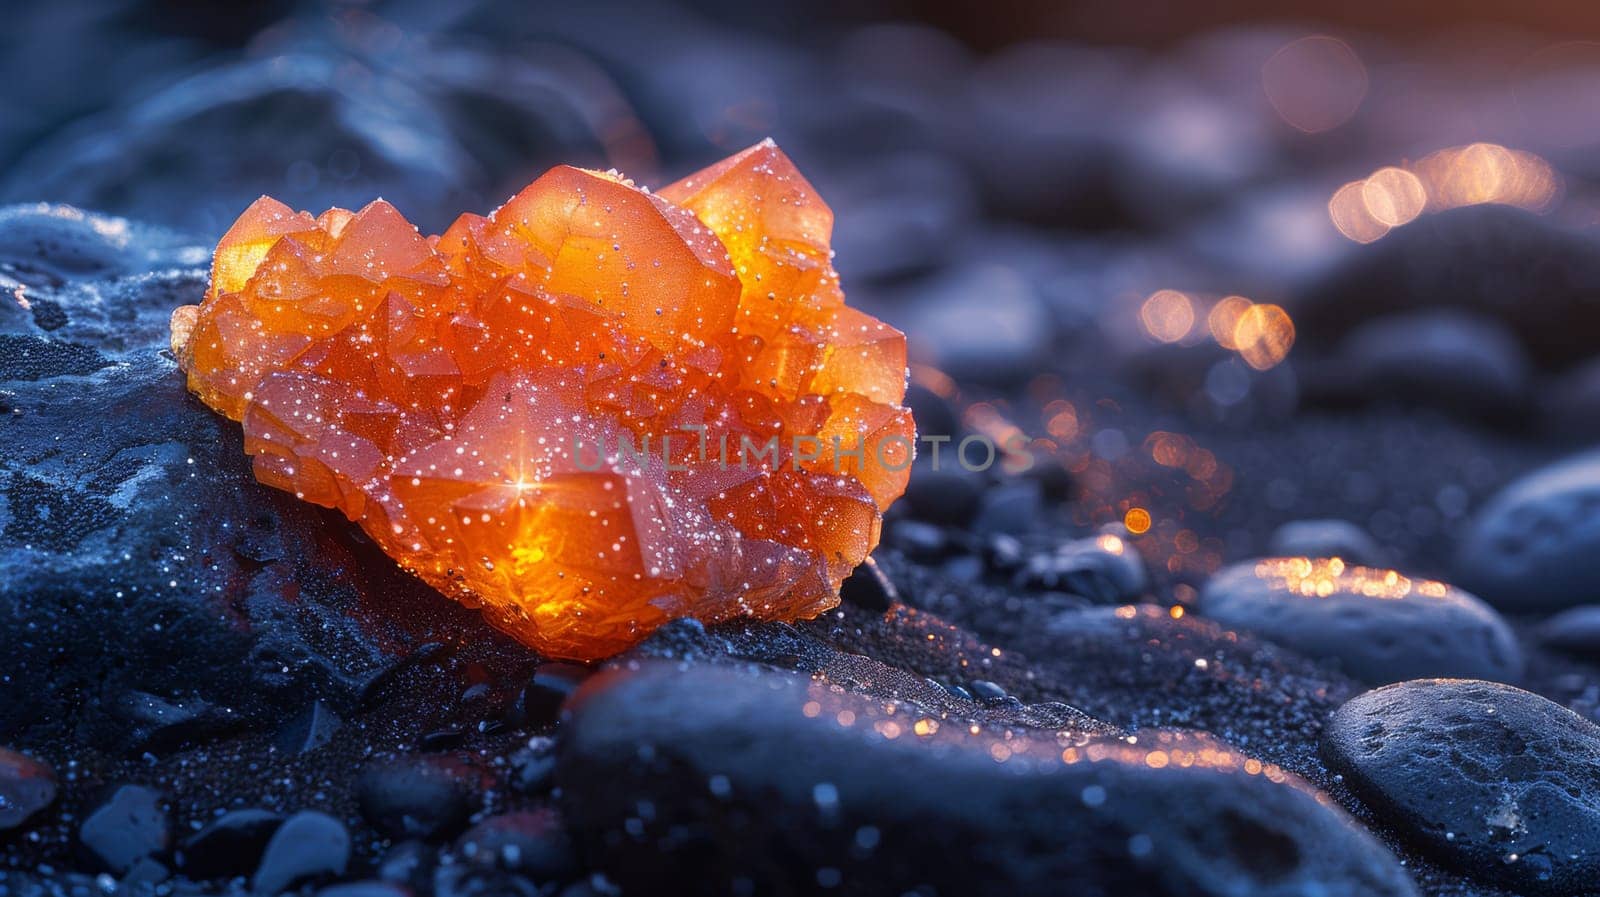 A close up of a orange rock sitting on some rocks, AI by starush